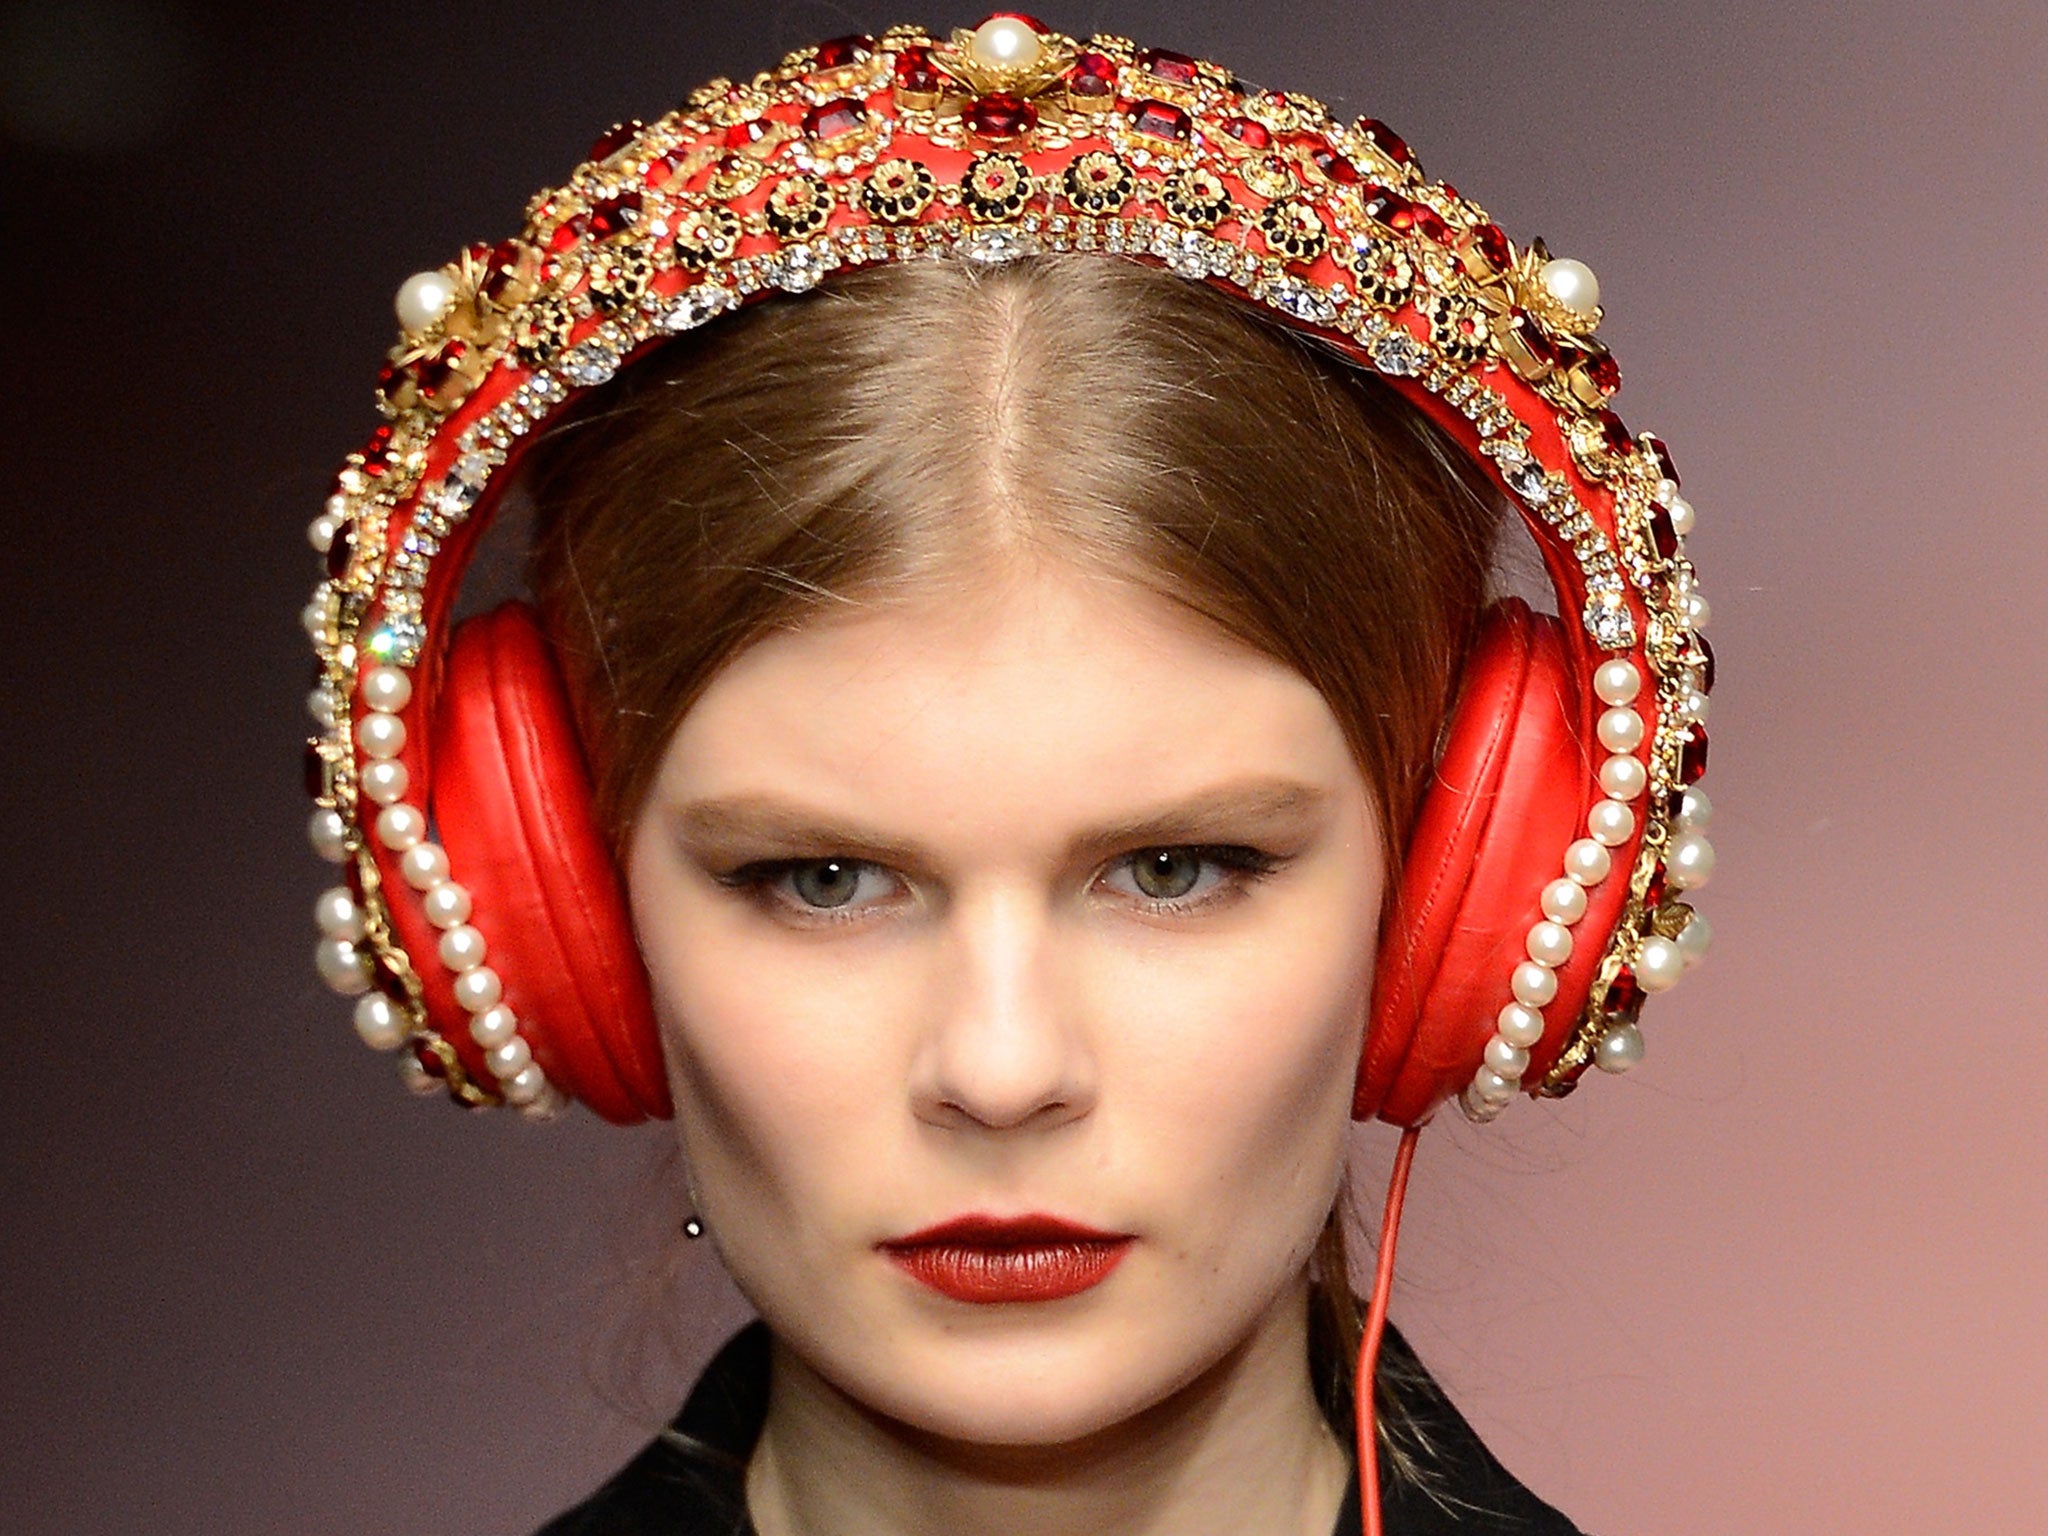 Dolce & Gabbana's headphones, made in partnership with Frends, to be sold online for $7,000